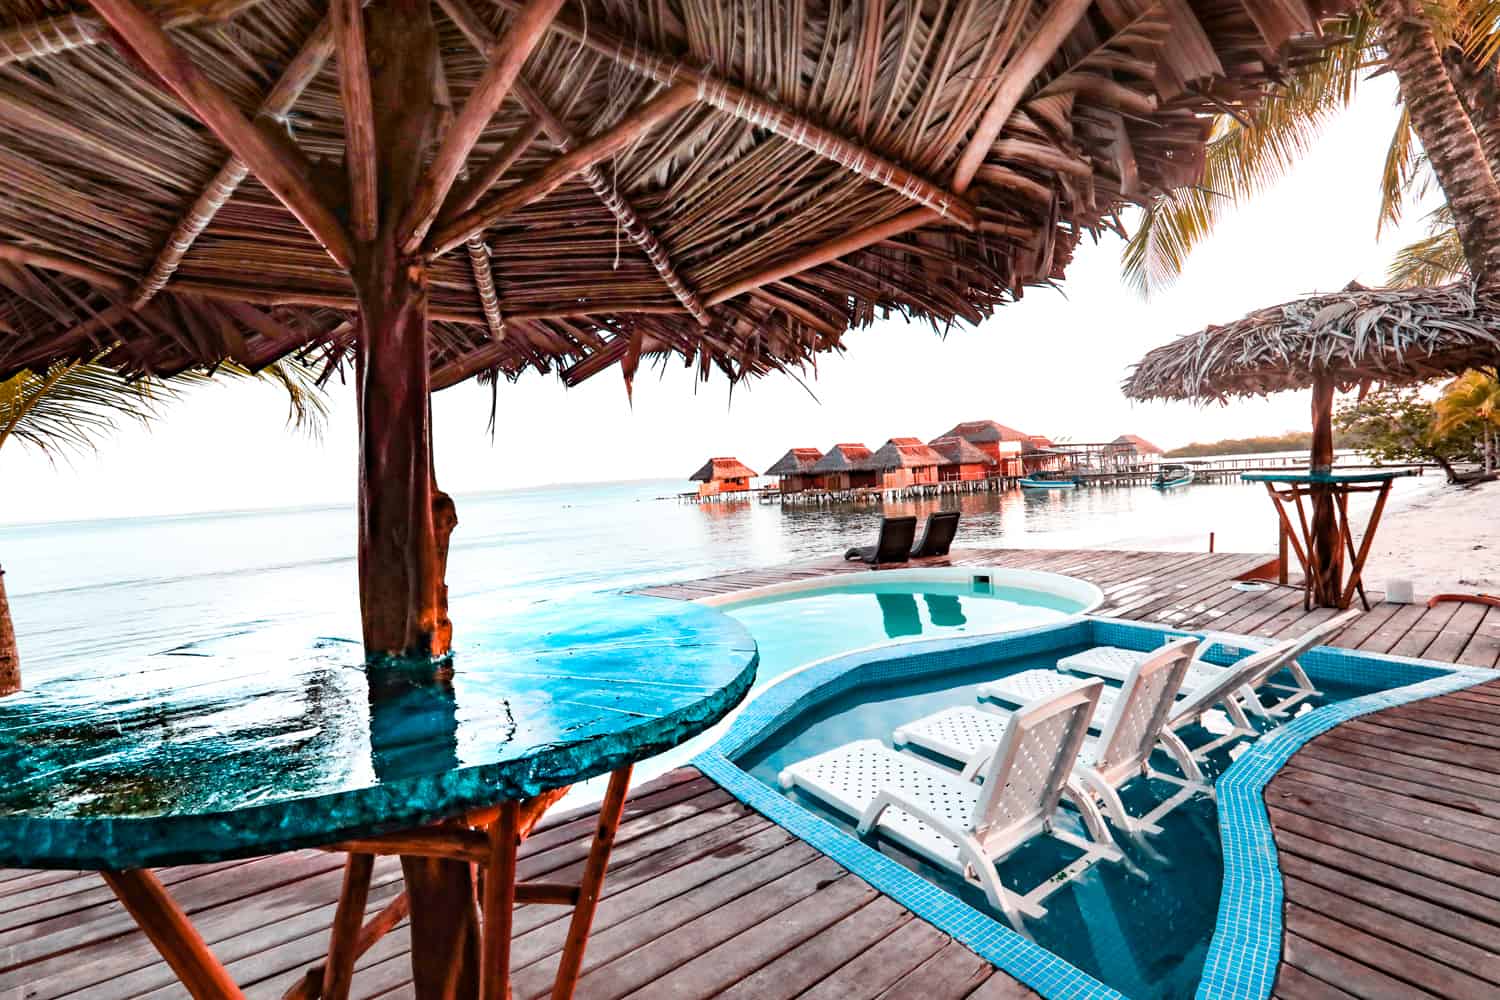 Image of overwater bungalows in Panama